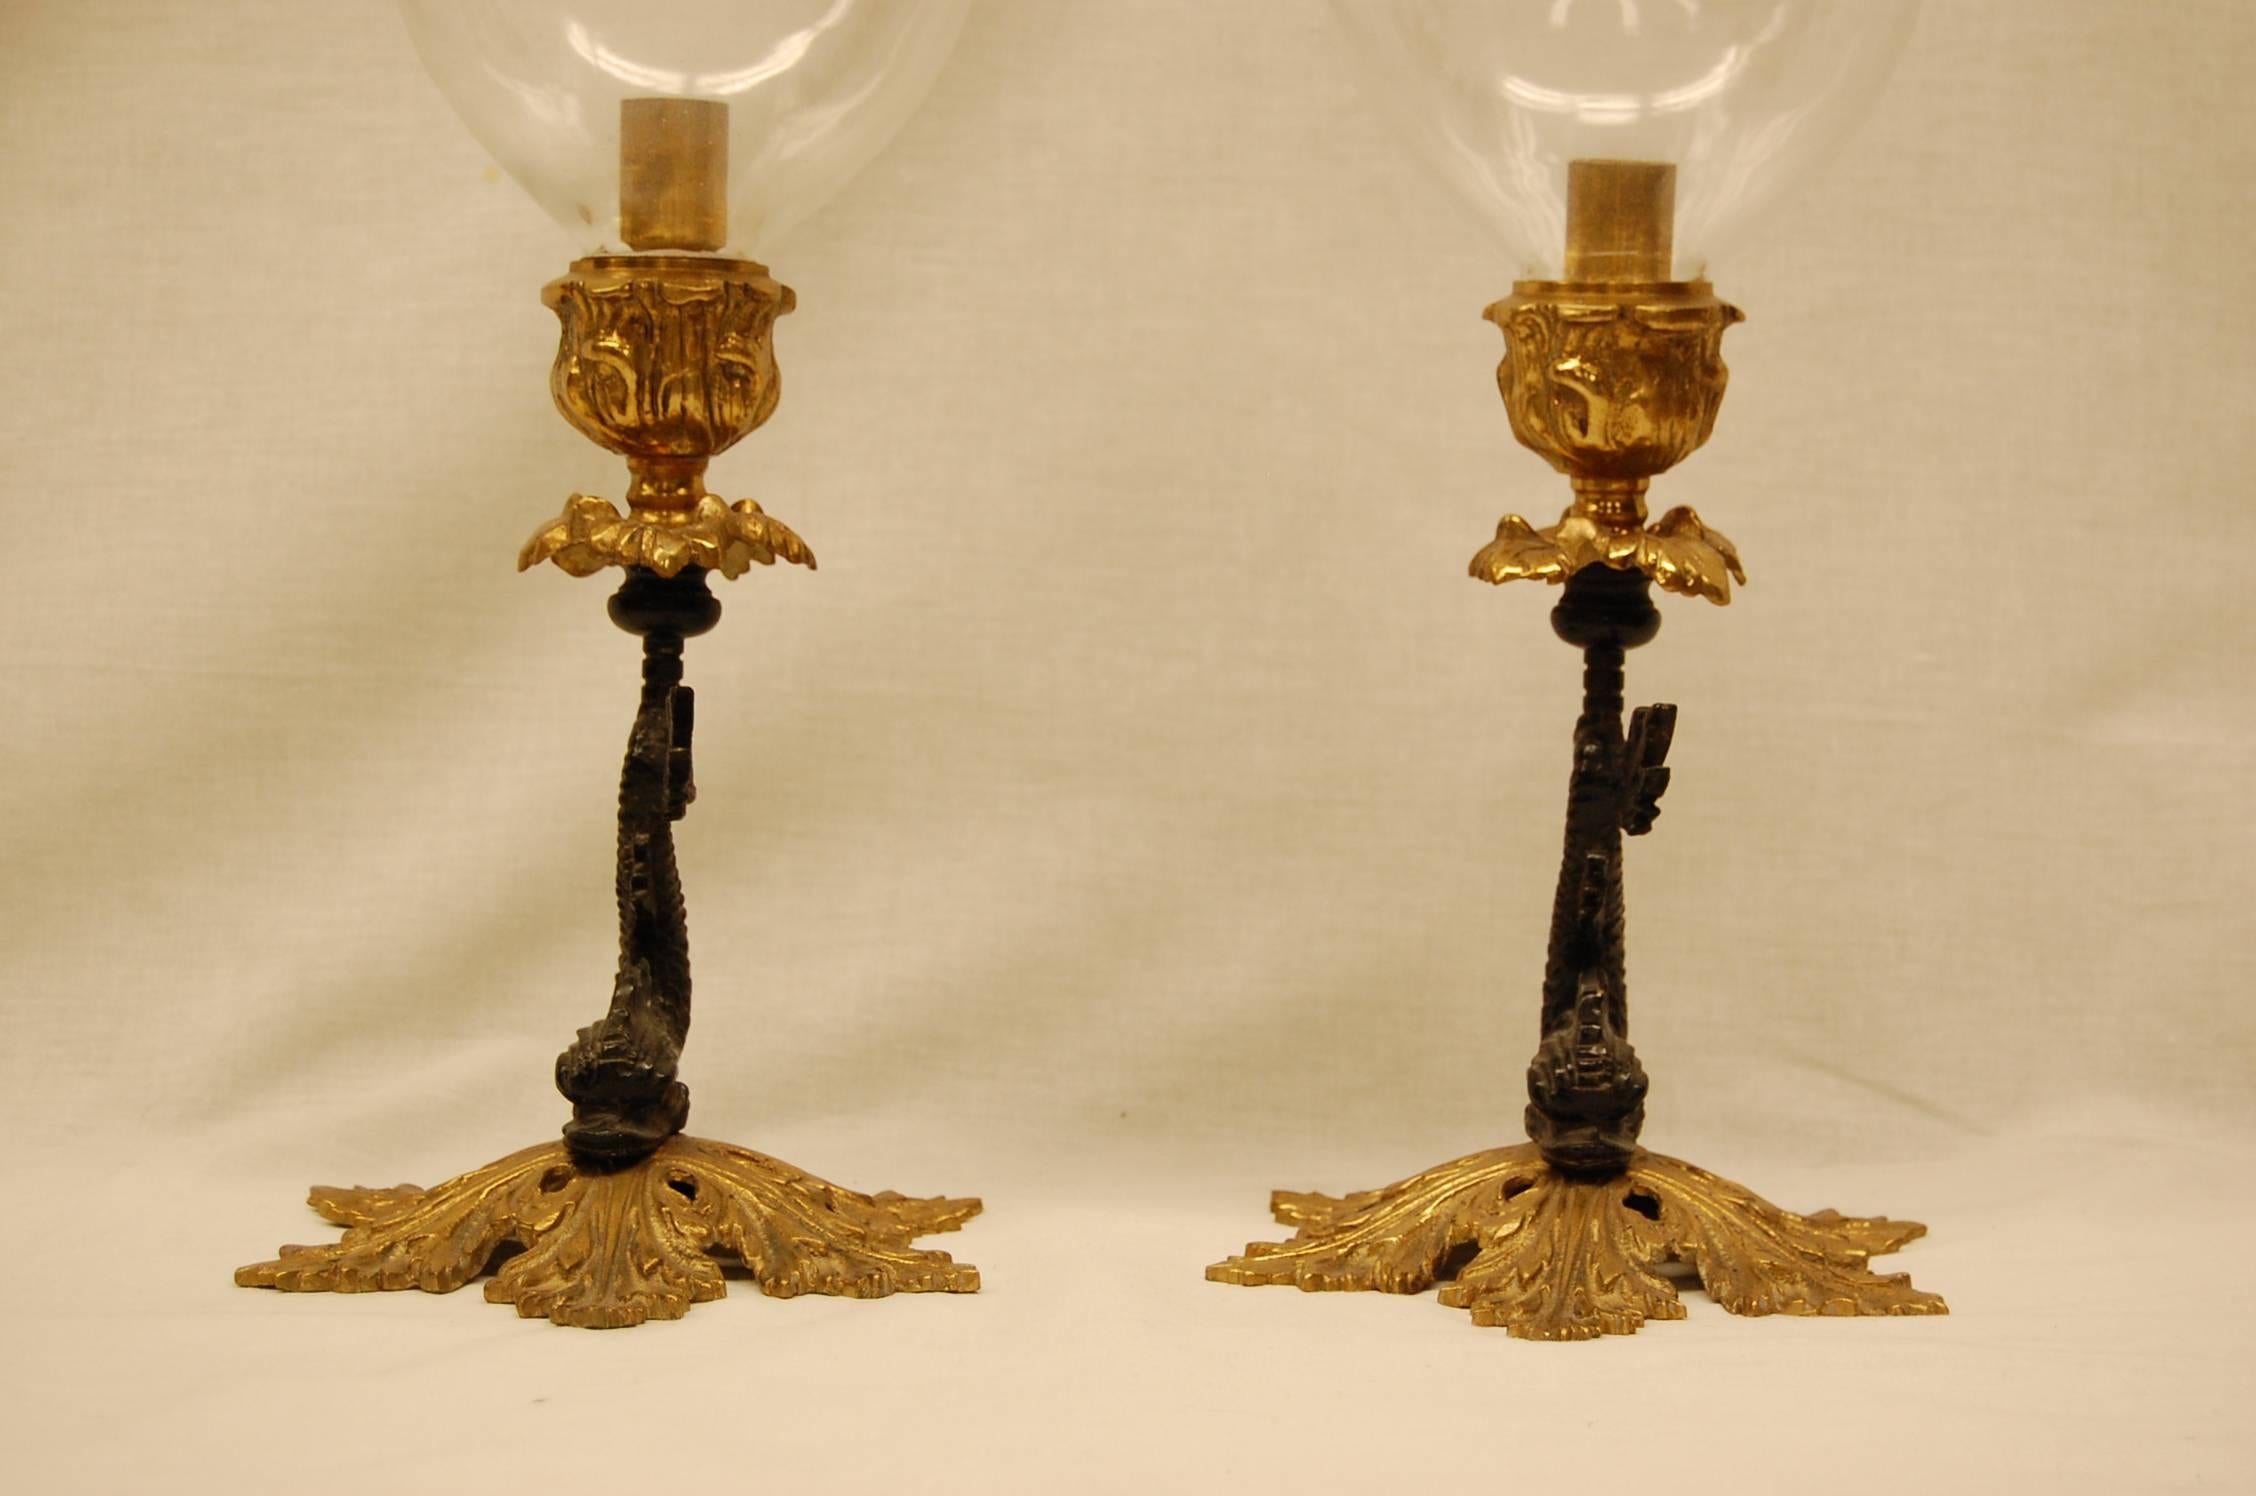 Empire Revival Pair of Reproduction Brass Candlesticks with Glass Hurricanes on Dolphin Bases